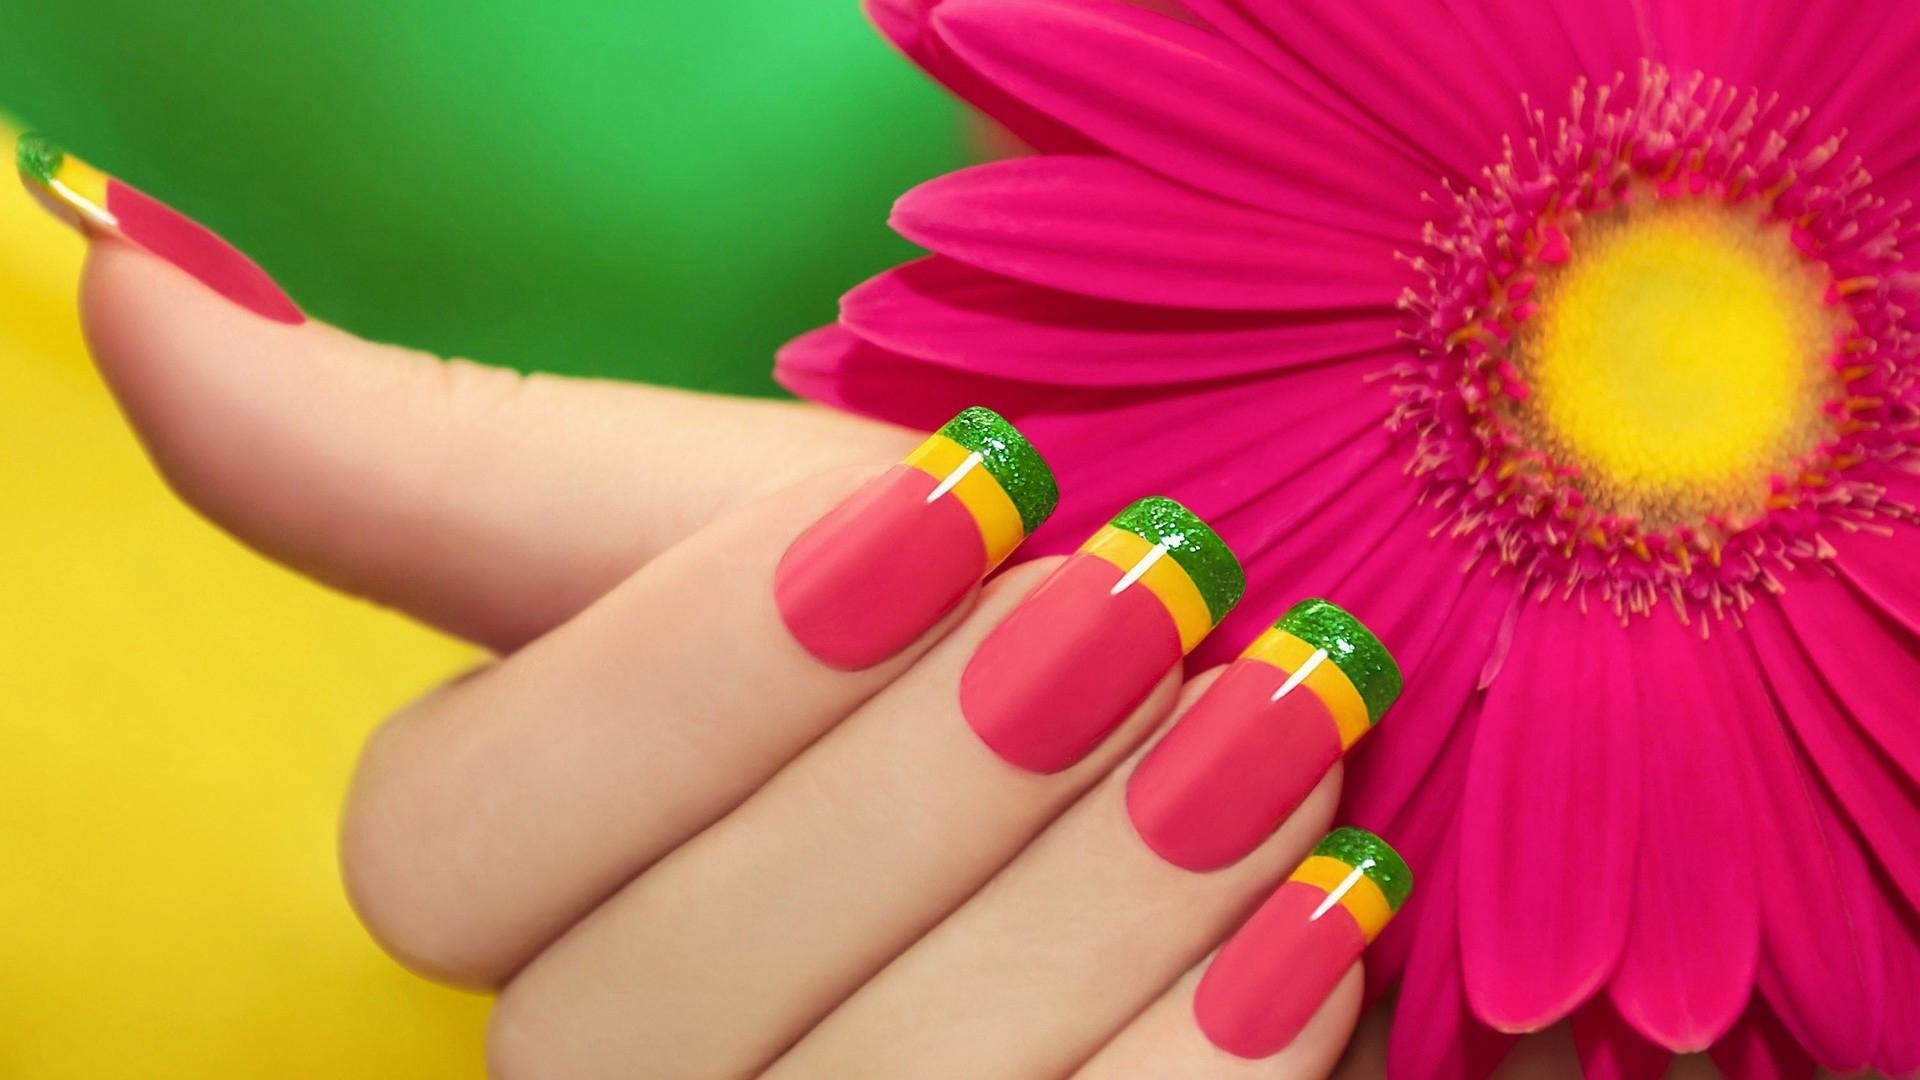 Colourful Nails Wallpaper Flowers And Nails Wallpaper , HD Wallpaper & Backgrounds